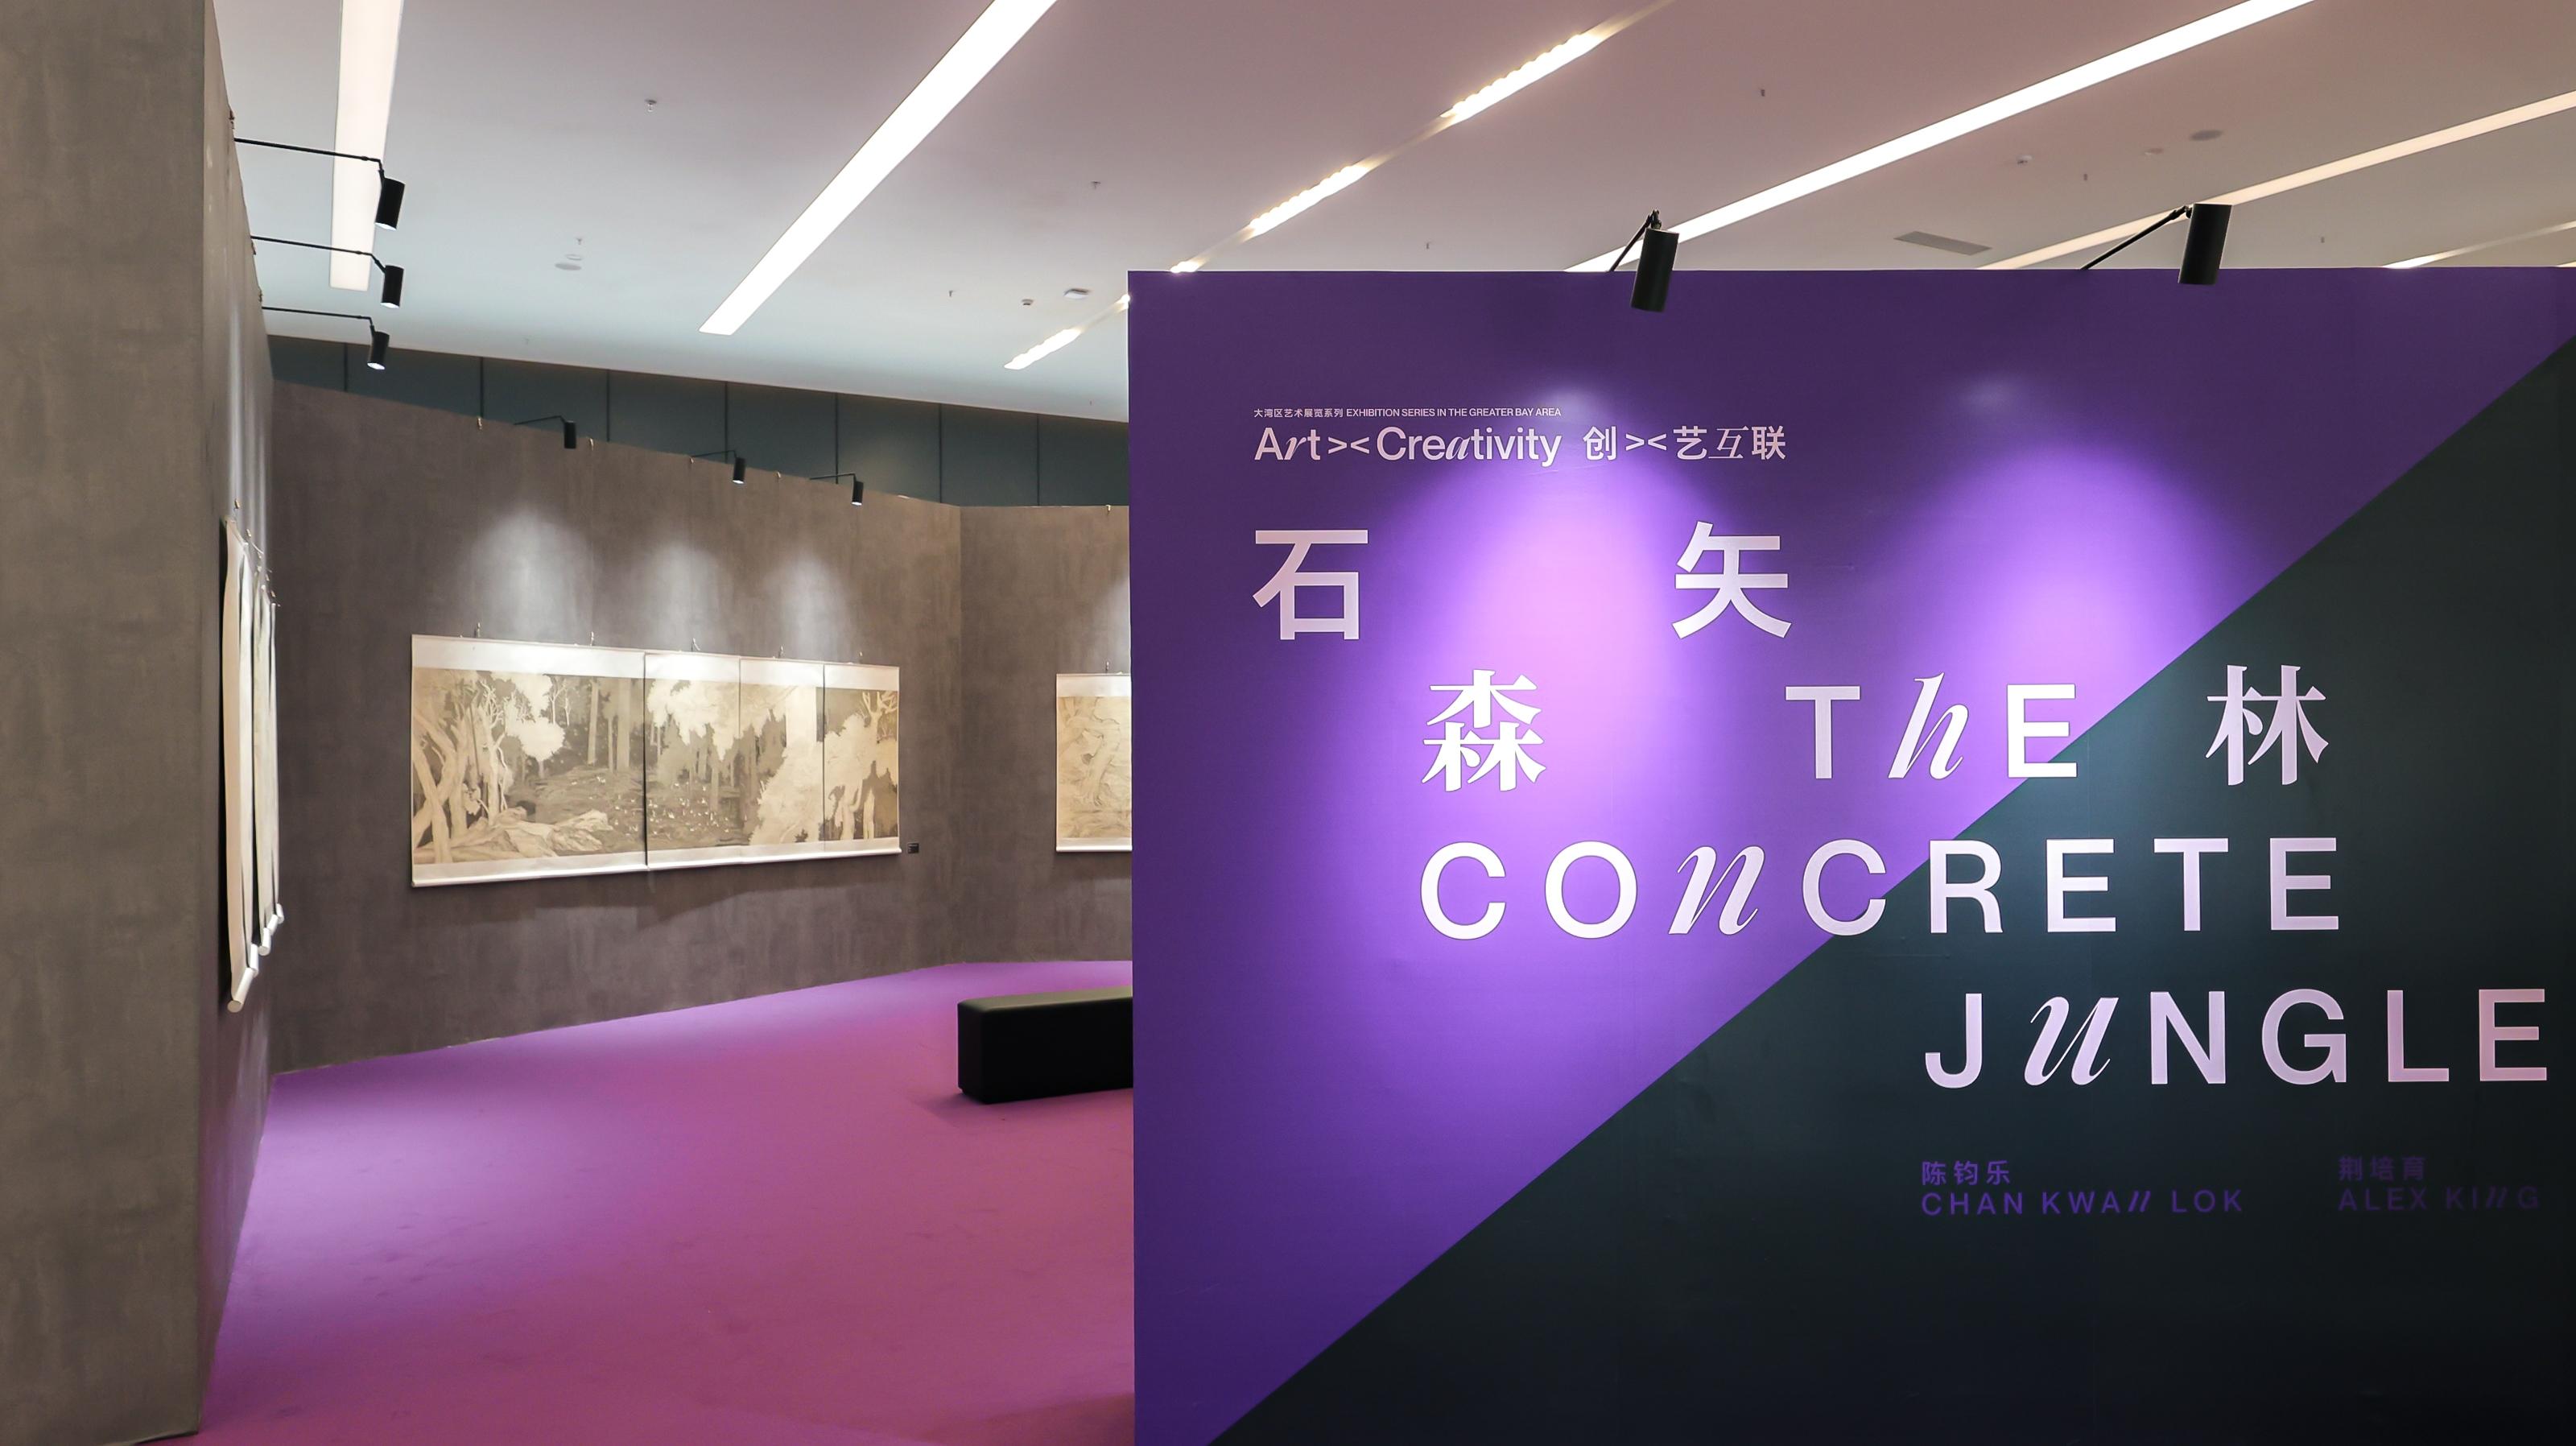 Co-organised by the Art Promotion Office and the Hong Kong Designers Association, the fifth exhibition of the second round of the "Art >< Creativity" exhibition series in the Greater Bay Area, "The Concrete Jungle", is open from today (September 26) to November 12 at the Zhaoqing Museum.